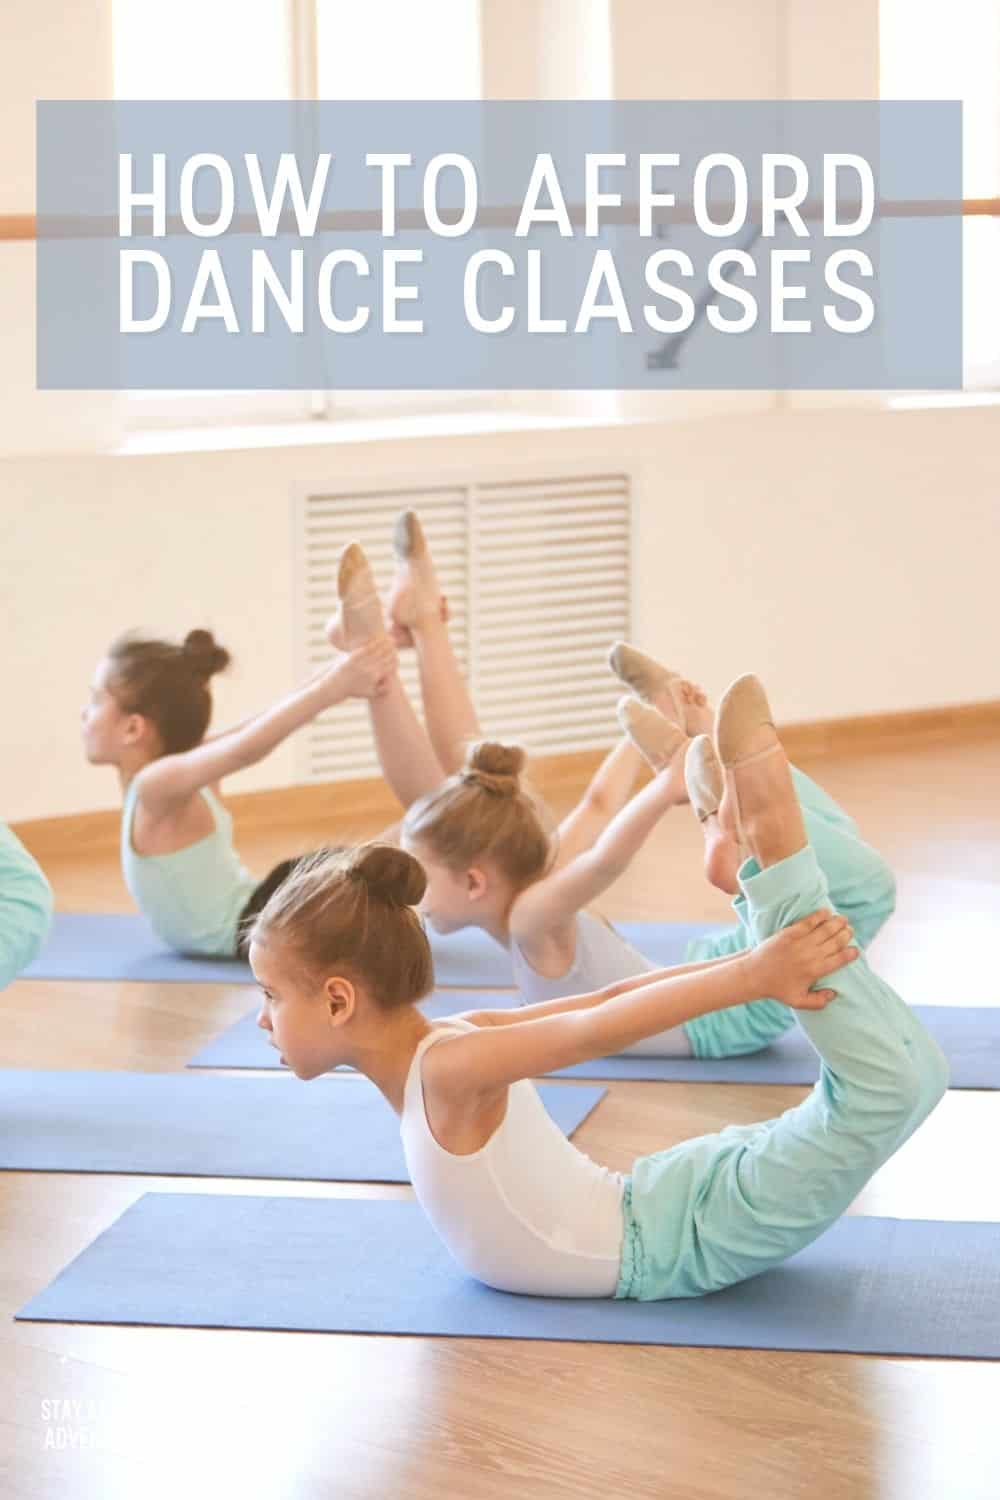 Learn how to afford dance classes with these eight budget-friendly tips. From finding aid to shopping around there are many ways to dance on a budget. #budget #dance #howto #afford #moneysavingtips via @mystayathome